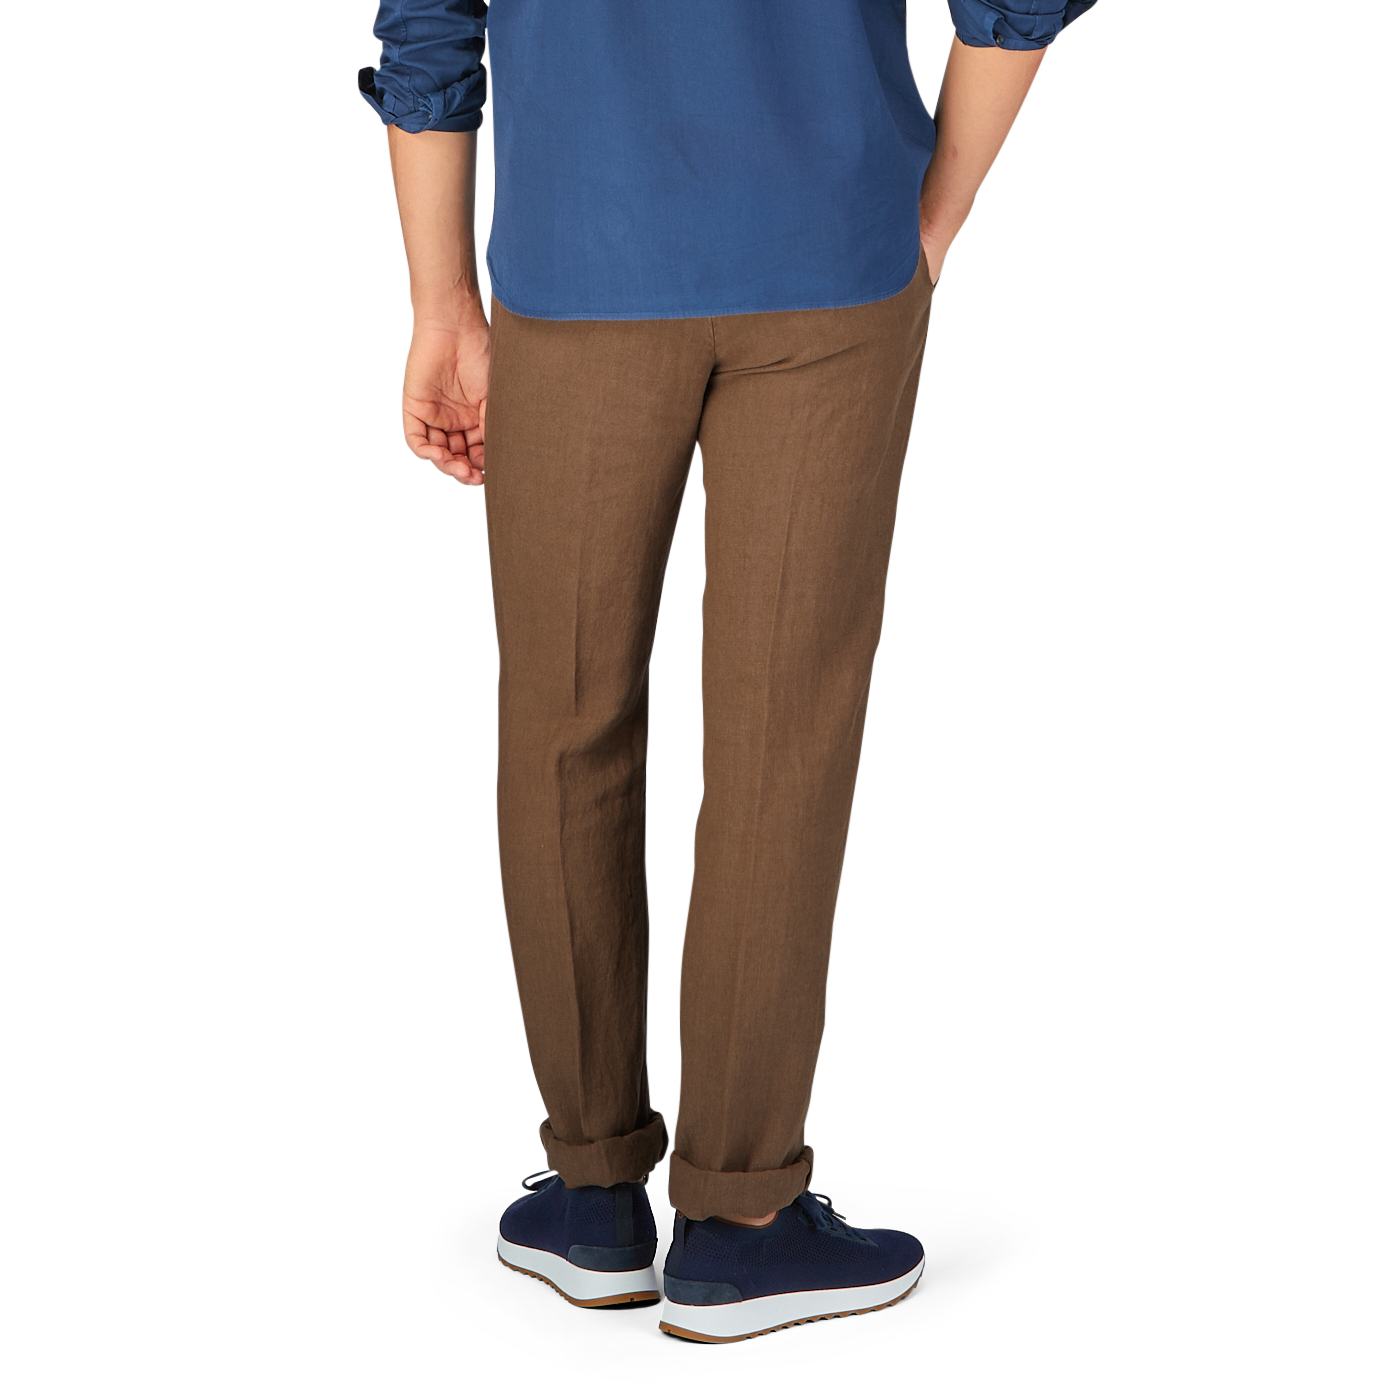 Man standing sideways wearing Massimo Alba Light Brown Linen Casual Trousers made in Italy, a blue shirt, and blue sneakers.